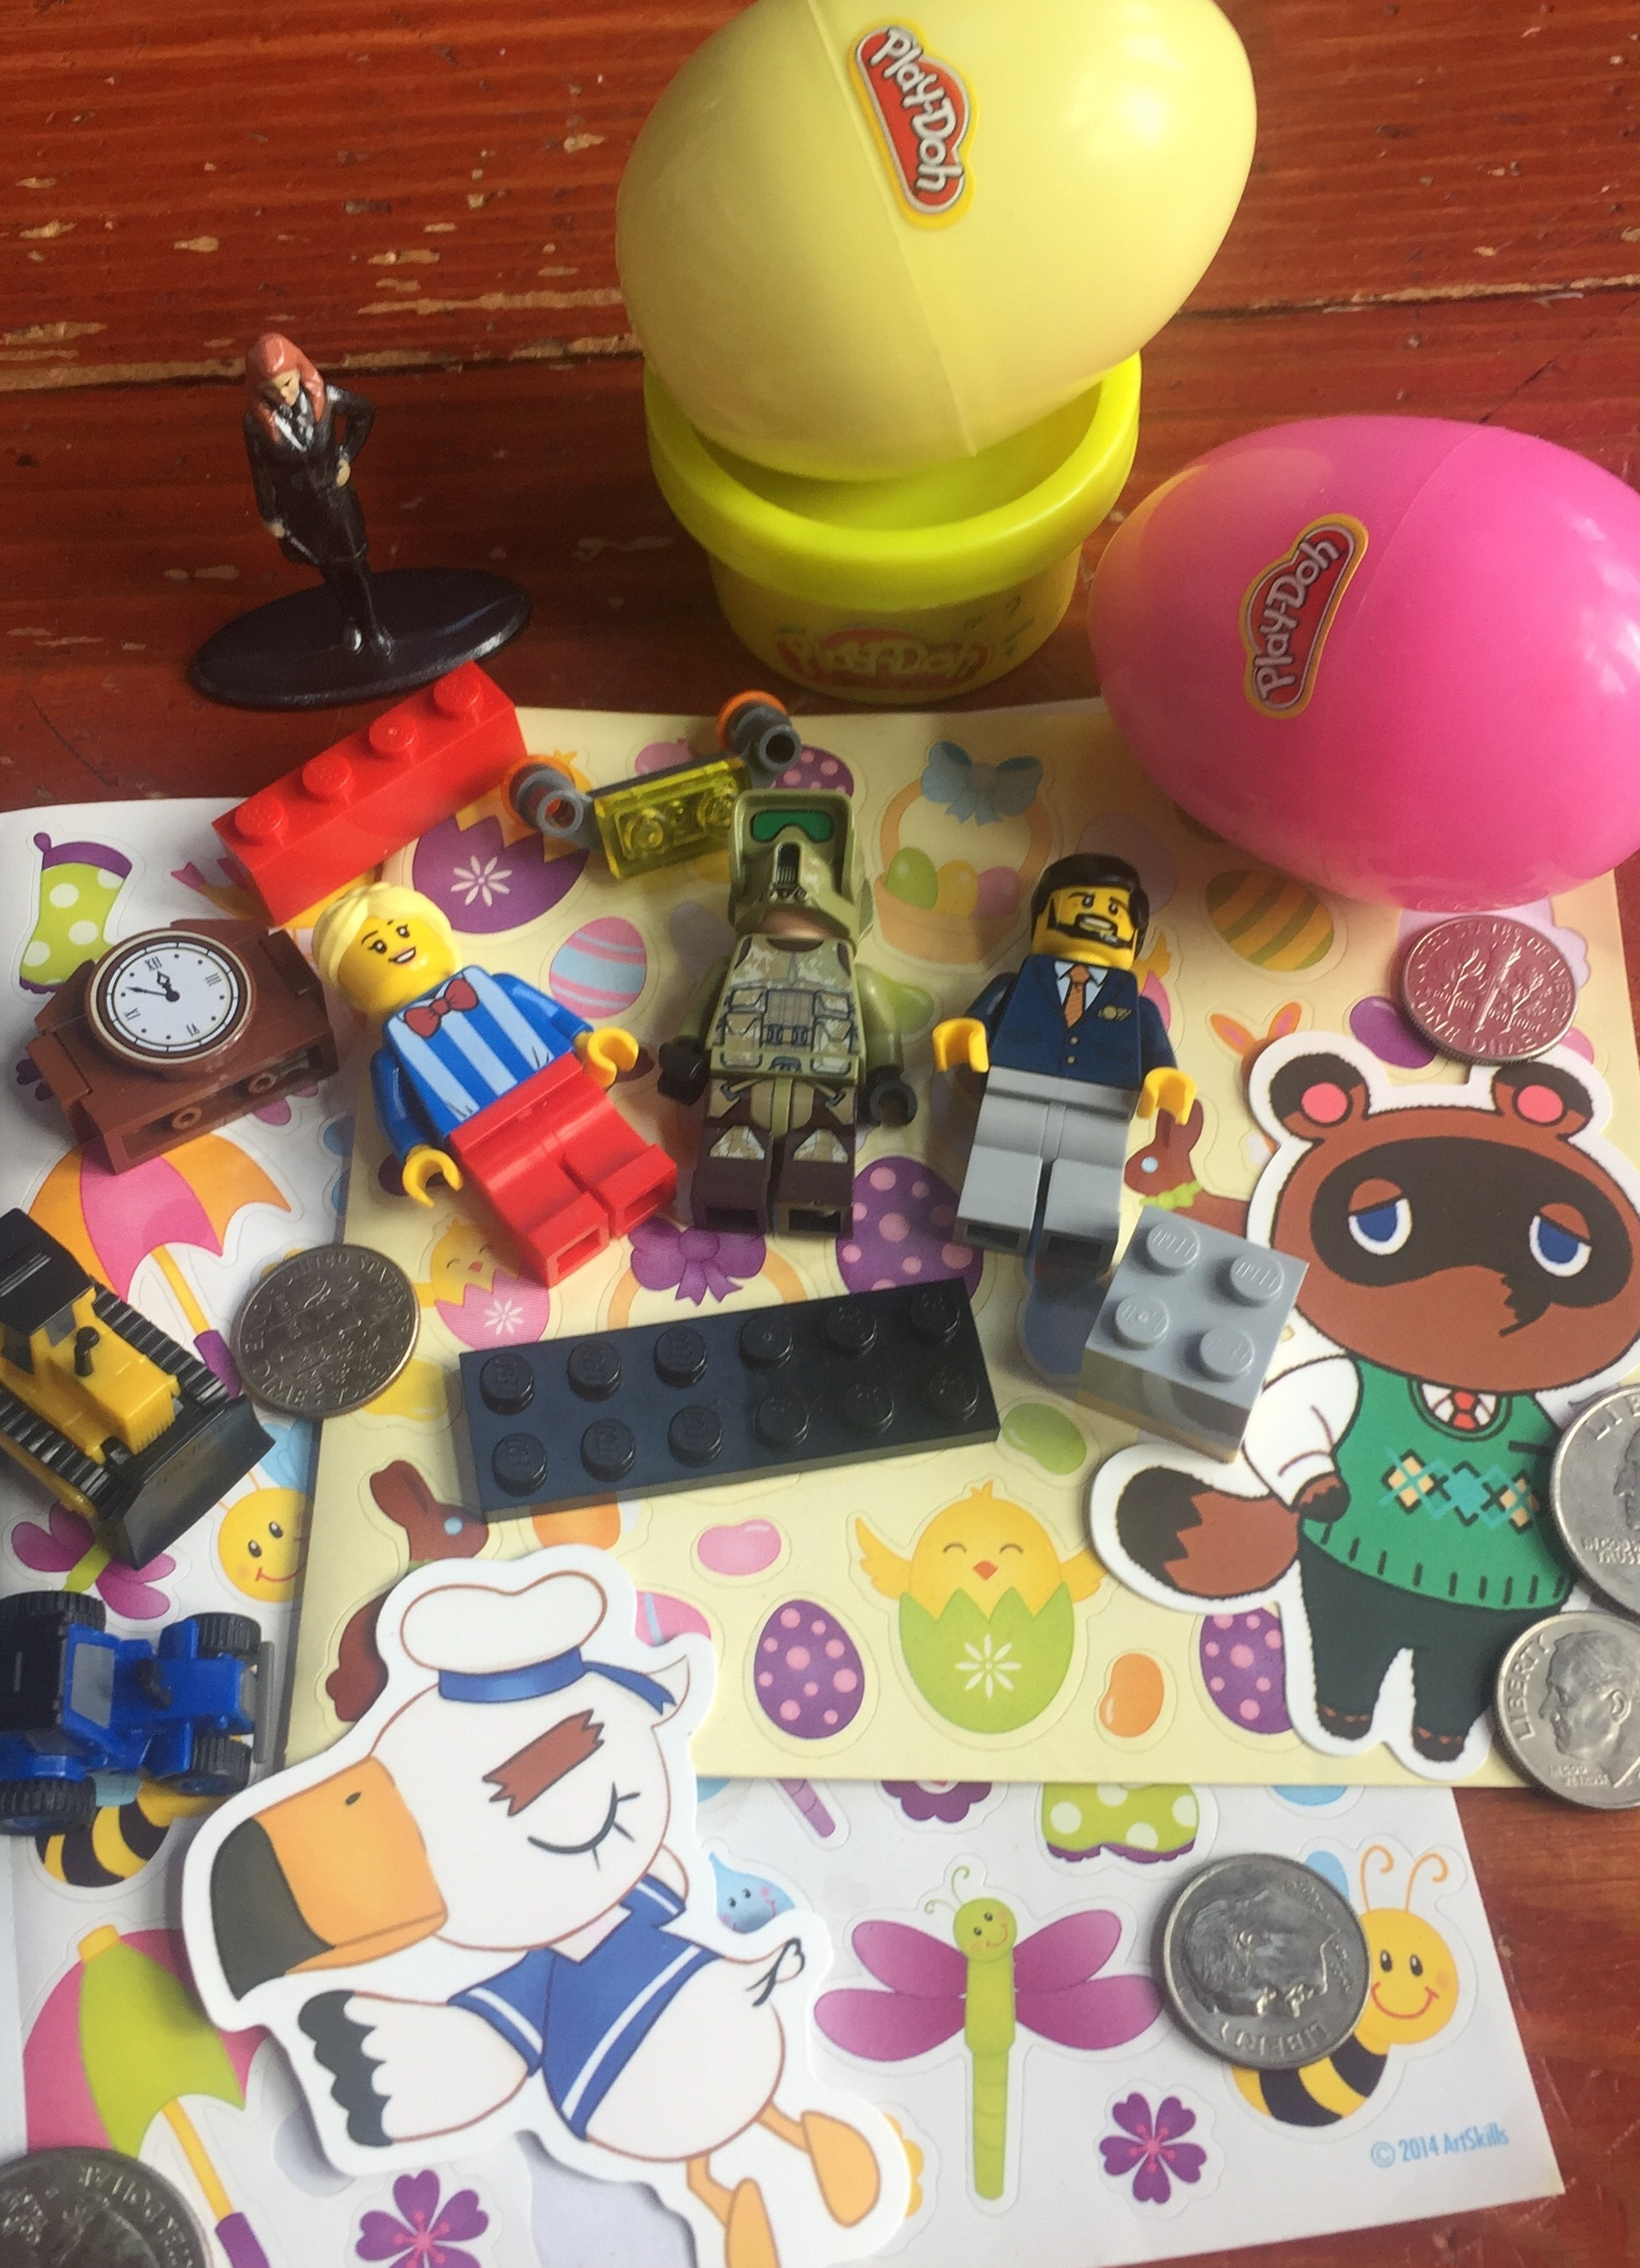 Play-doh Easter eggs Tom Nook Animal Crossing sticker Lego figures and pieces Hermione Grainger Harry Potter miniature figure coins